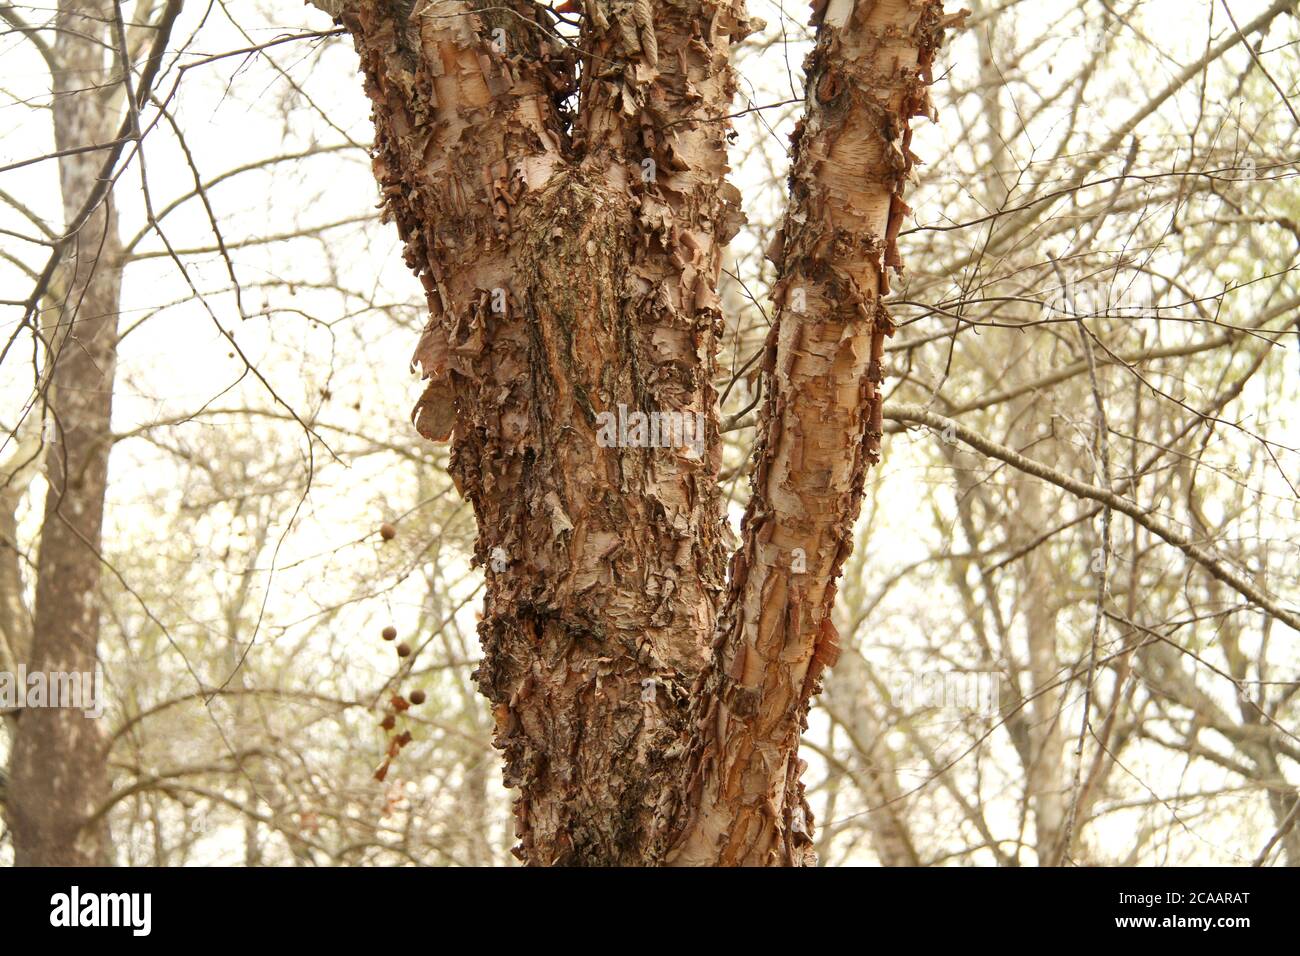 Close-up of exfoliating outer bark of a river birch tree Stock Photo